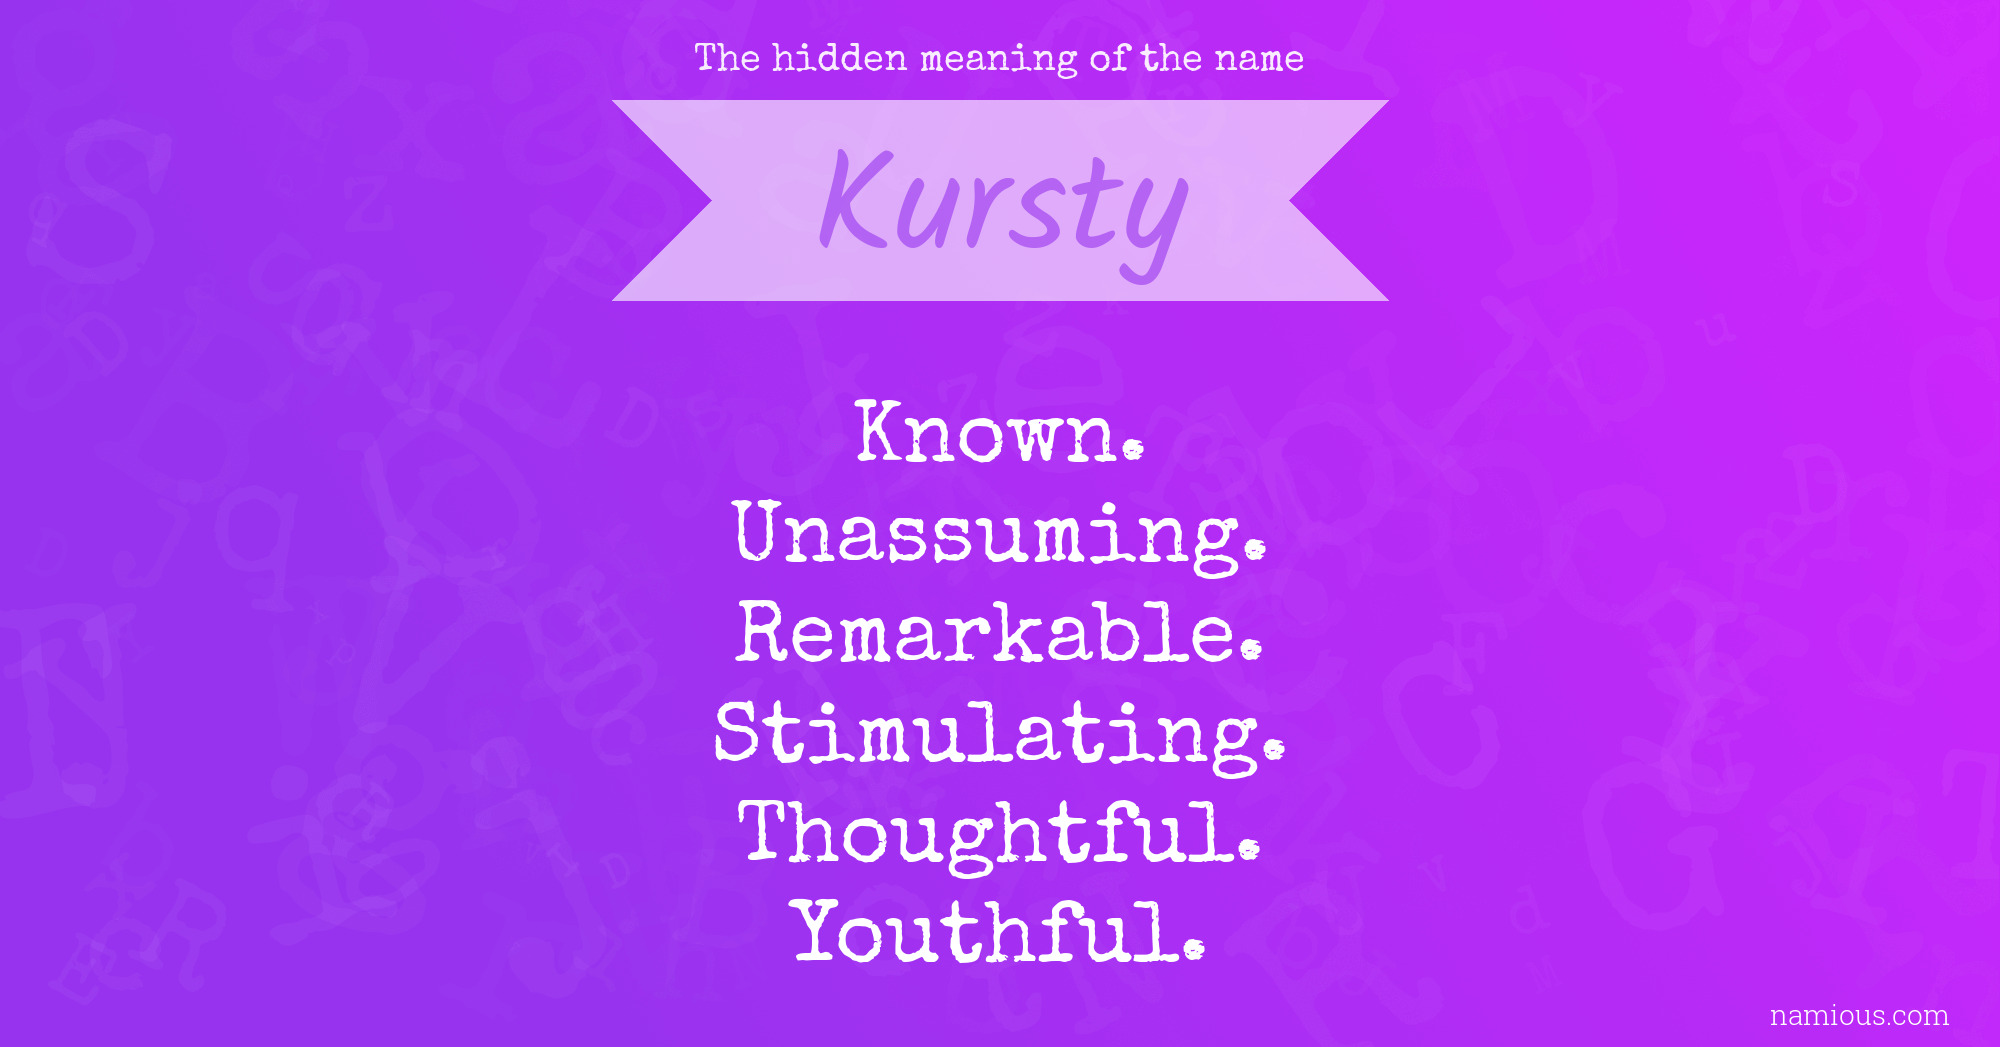 The hidden meaning of the name Kursty